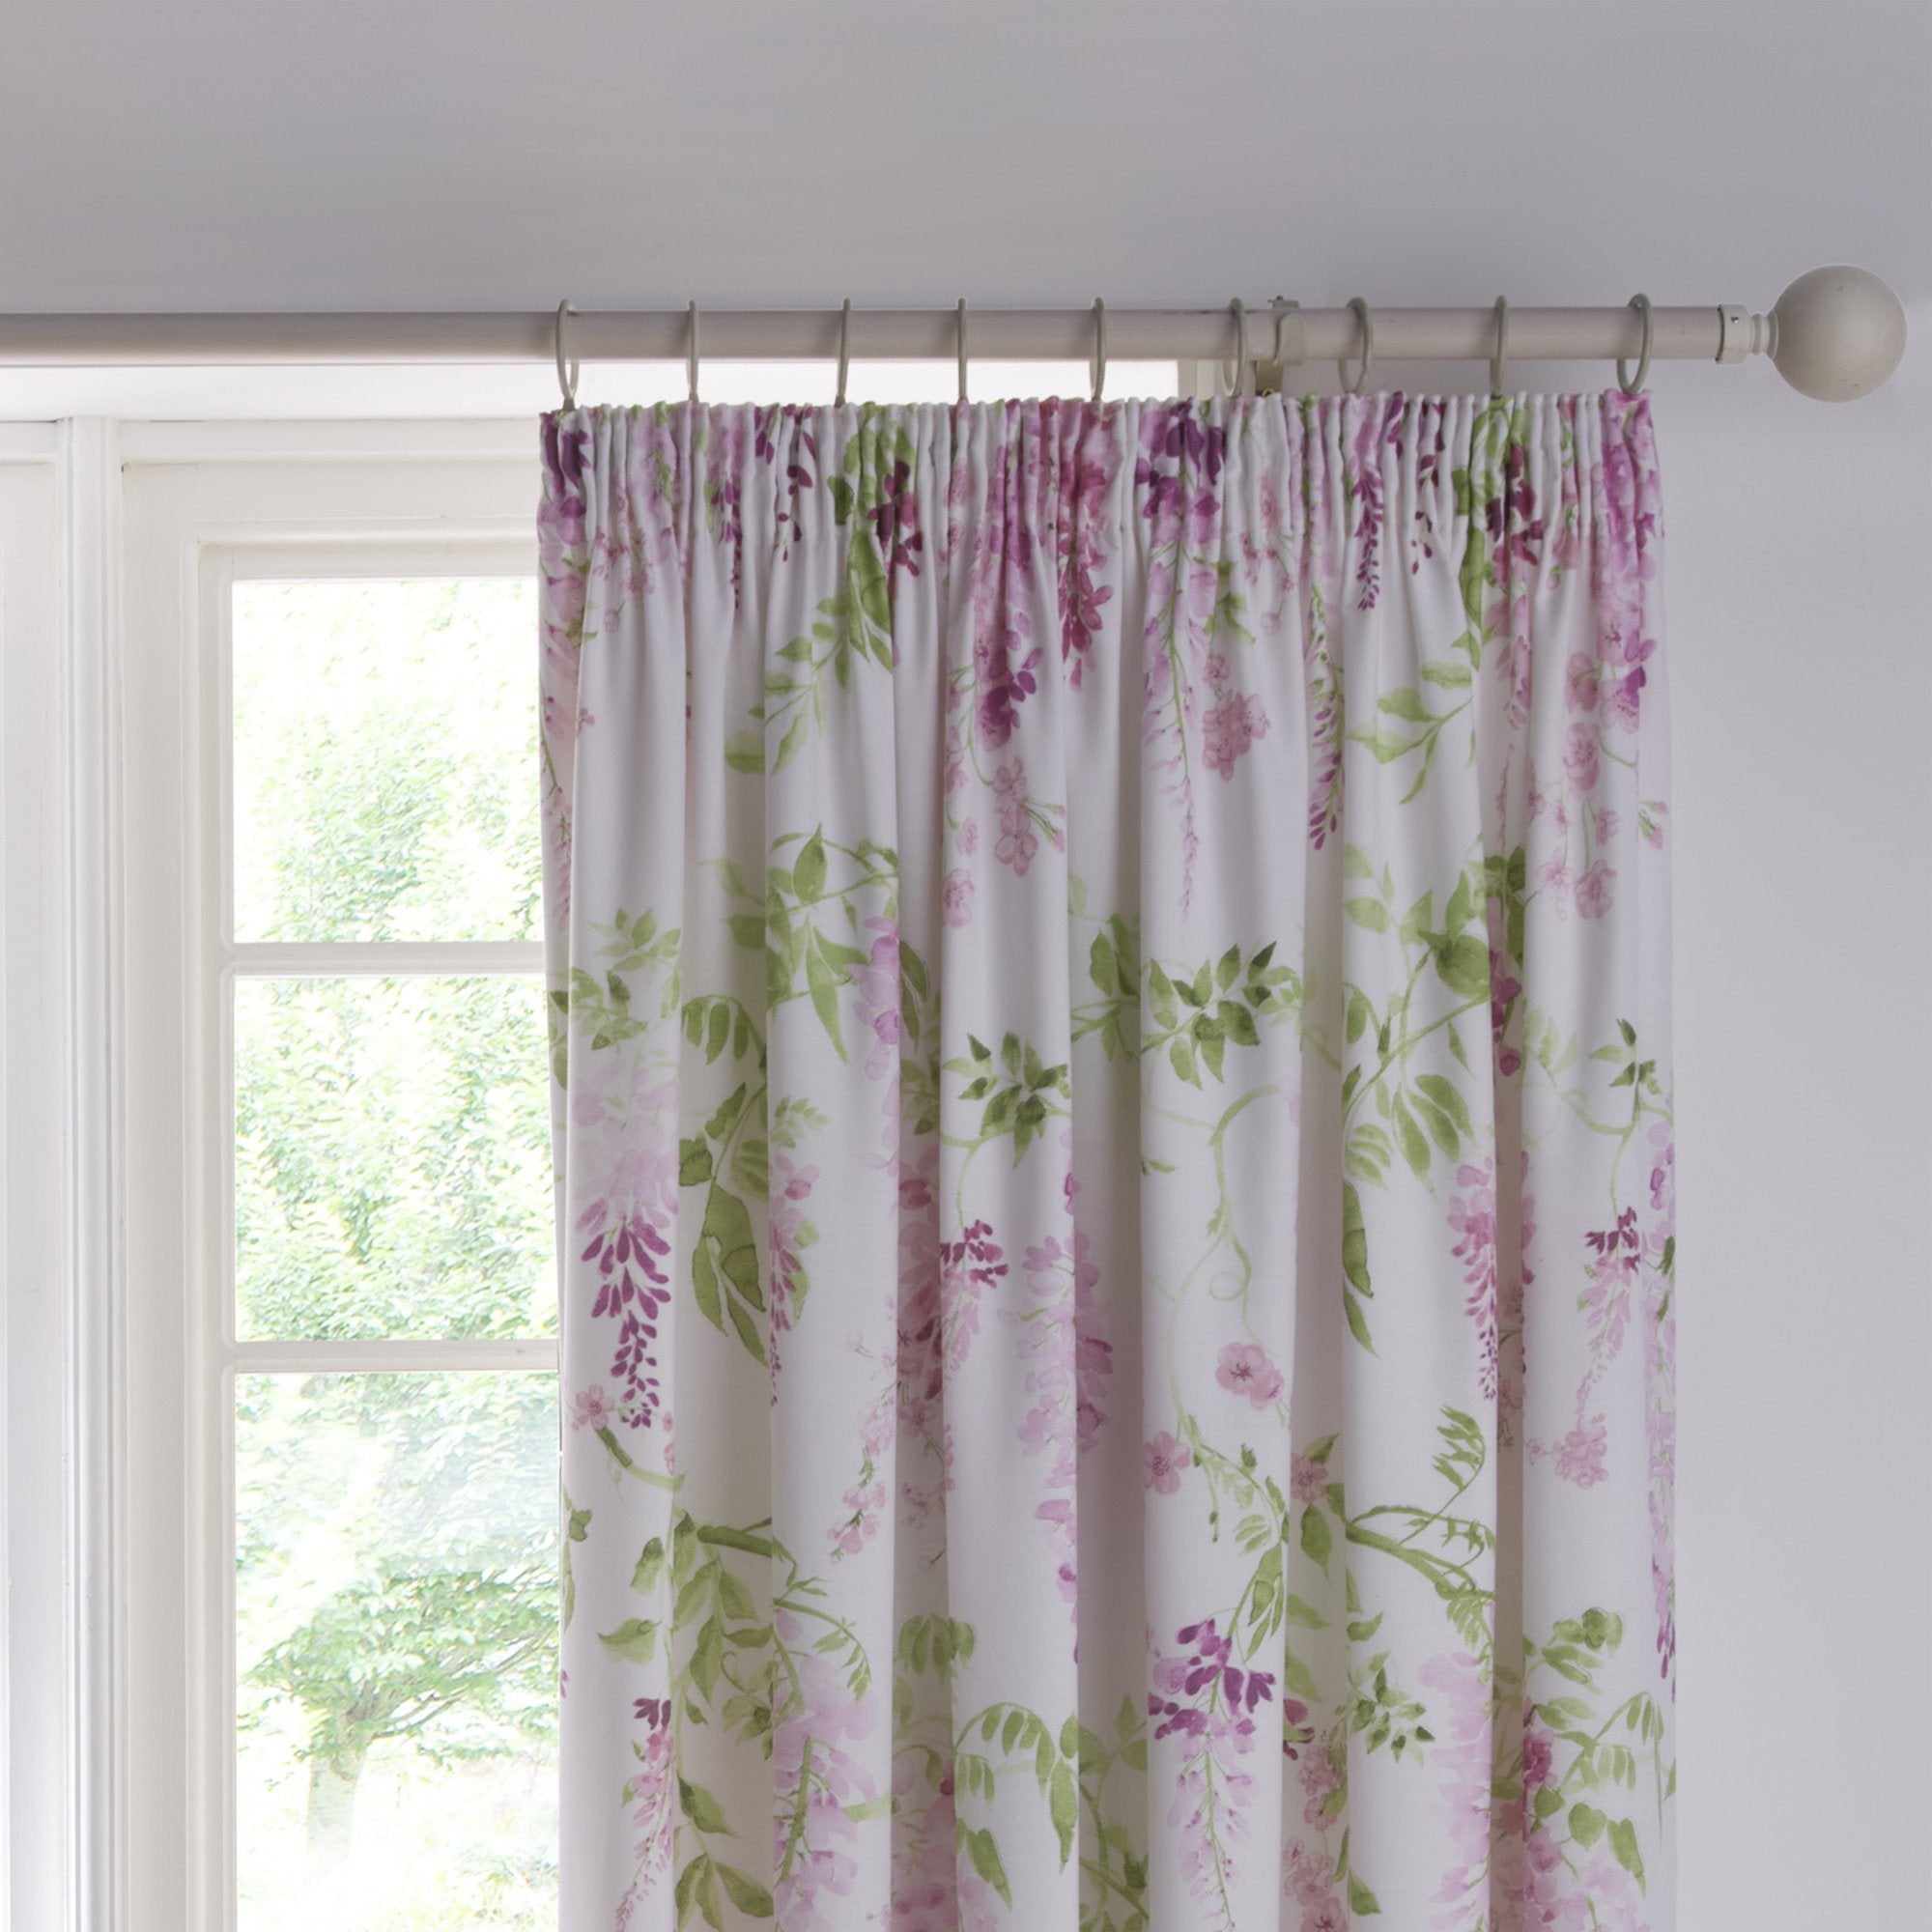 Pair of Pencil Pleat Curtains With Tie-Backs Wisteria by Dreams & Drapes Design in Pink